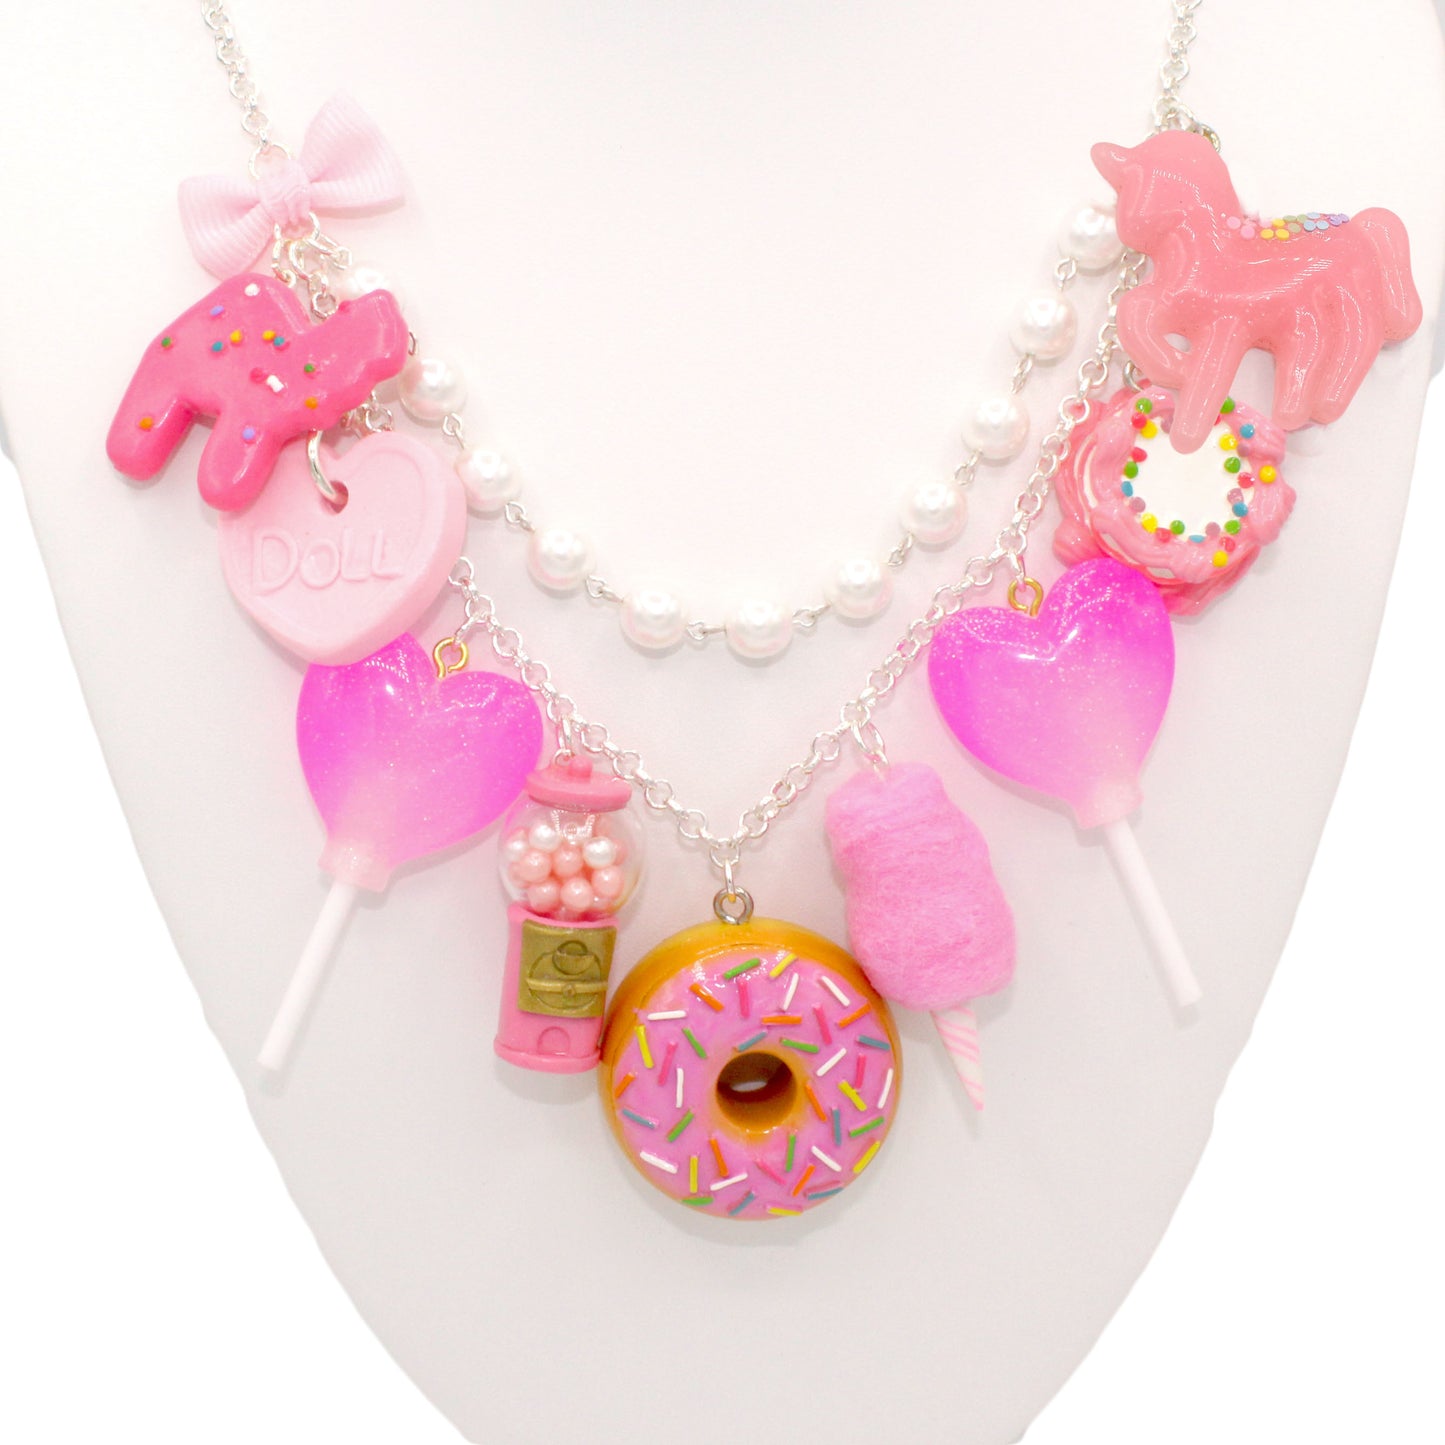 All Pink Candy Statement Necklace